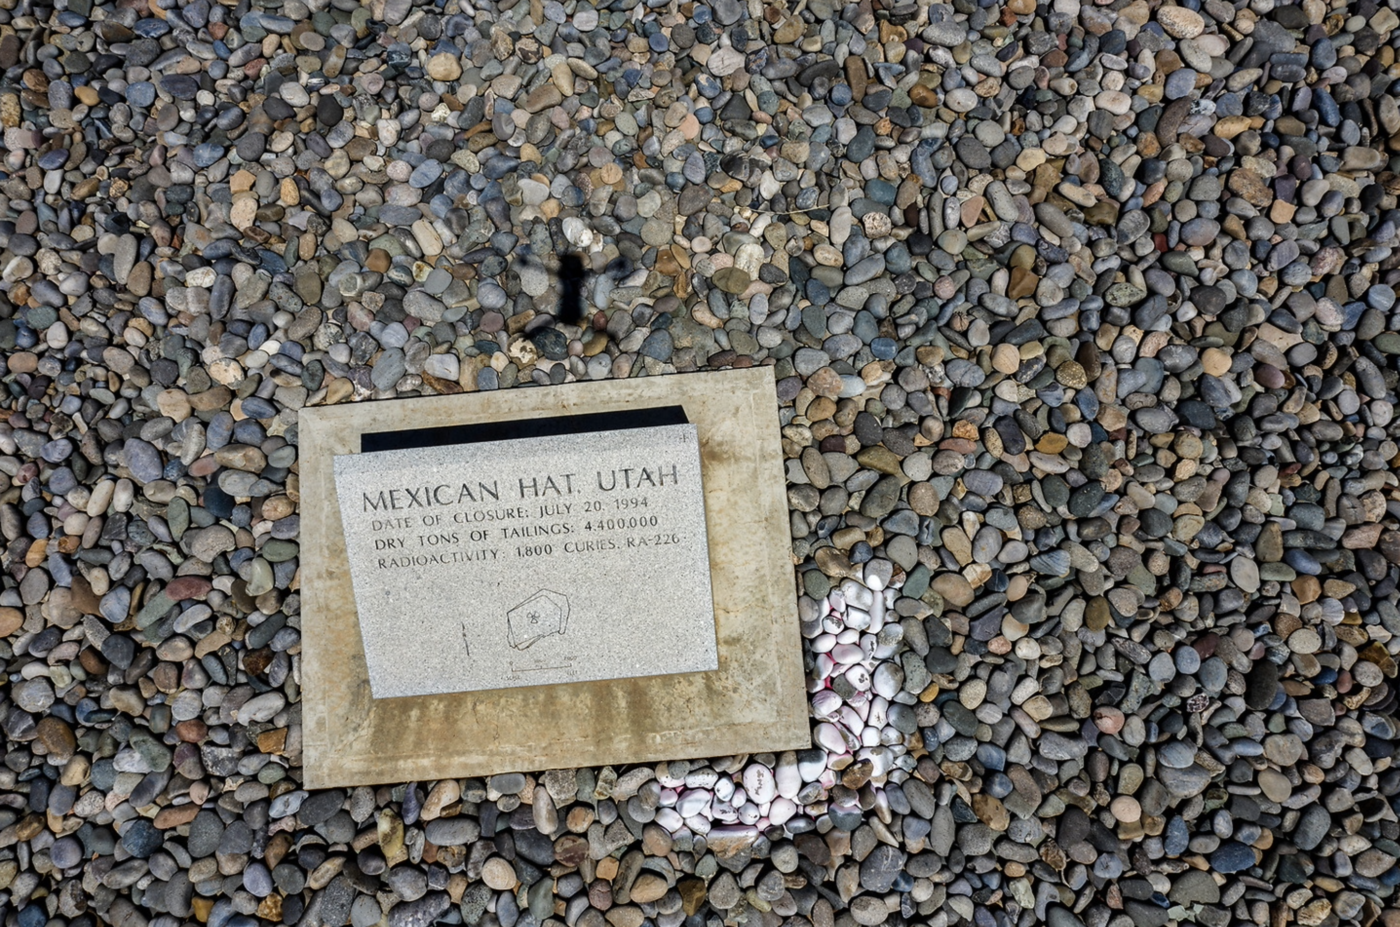 a marker on top of pebbles that reads Mexican Hat, Utah. Date of Closure: July 20 1994. Dry tons of Tailings: 4,400.00. Radioactivity : 1,800 Curies: RA-226